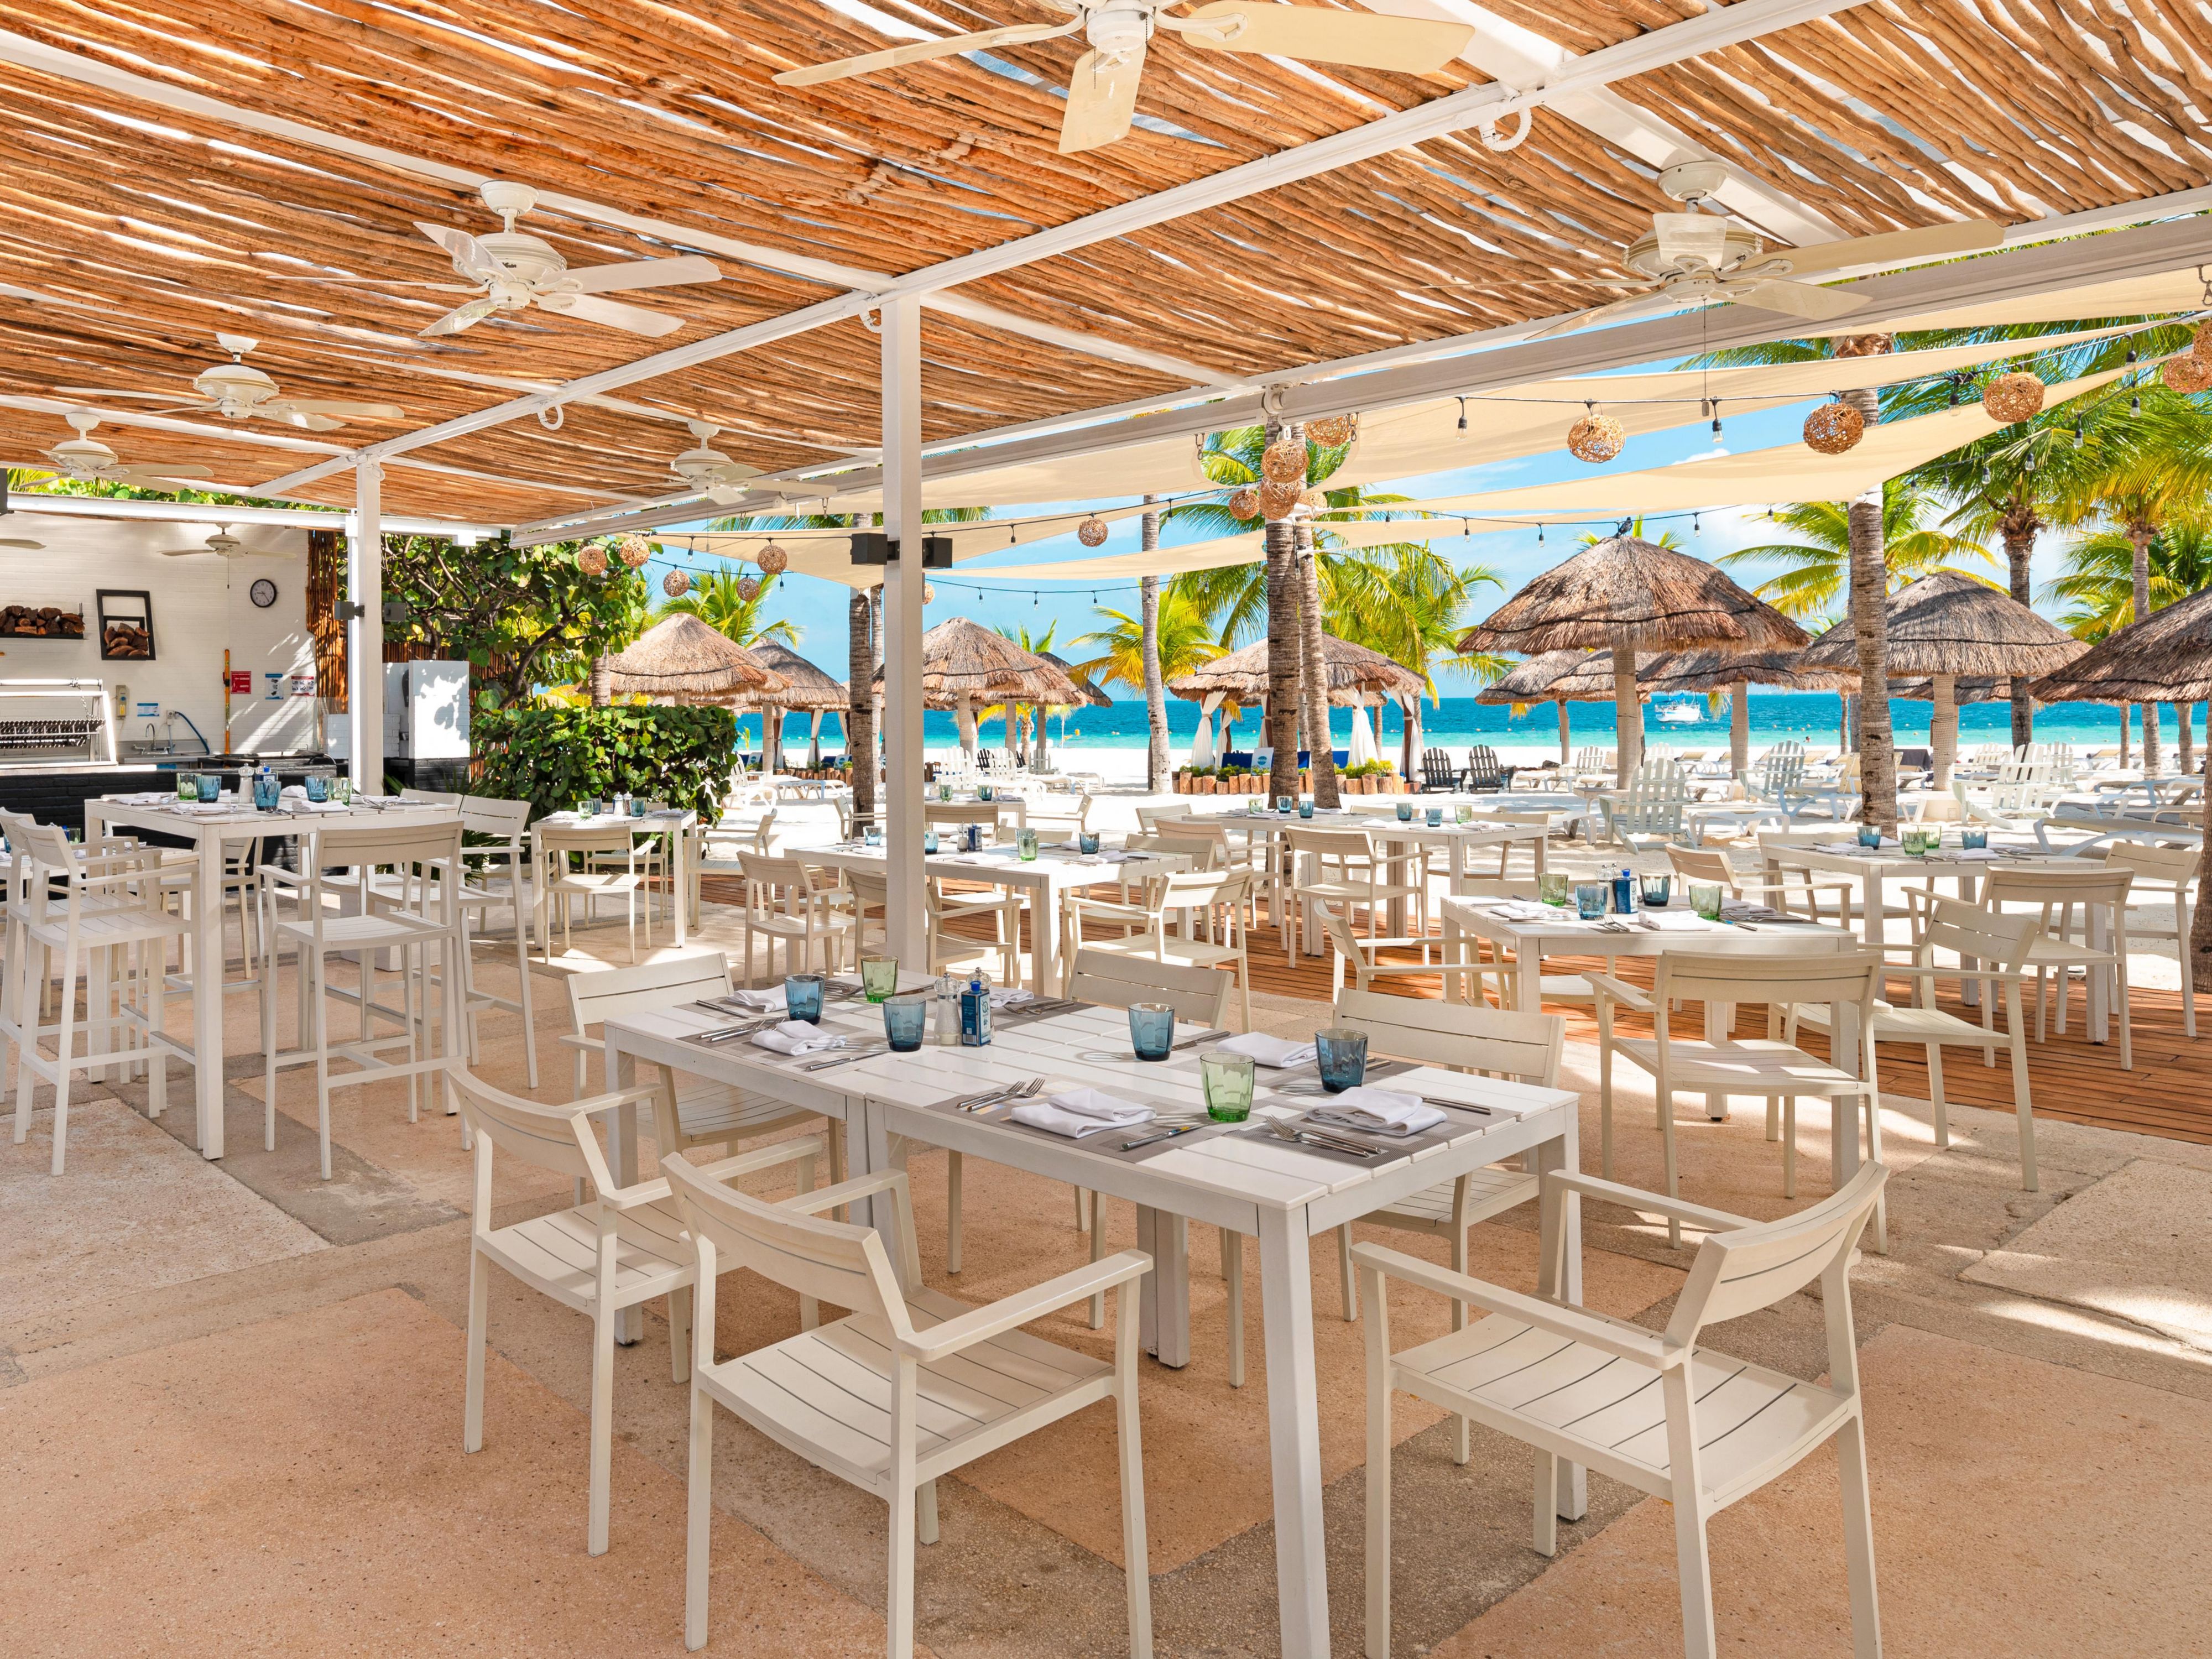 Listen to the waves while you eat at Le Cap Beach Club.